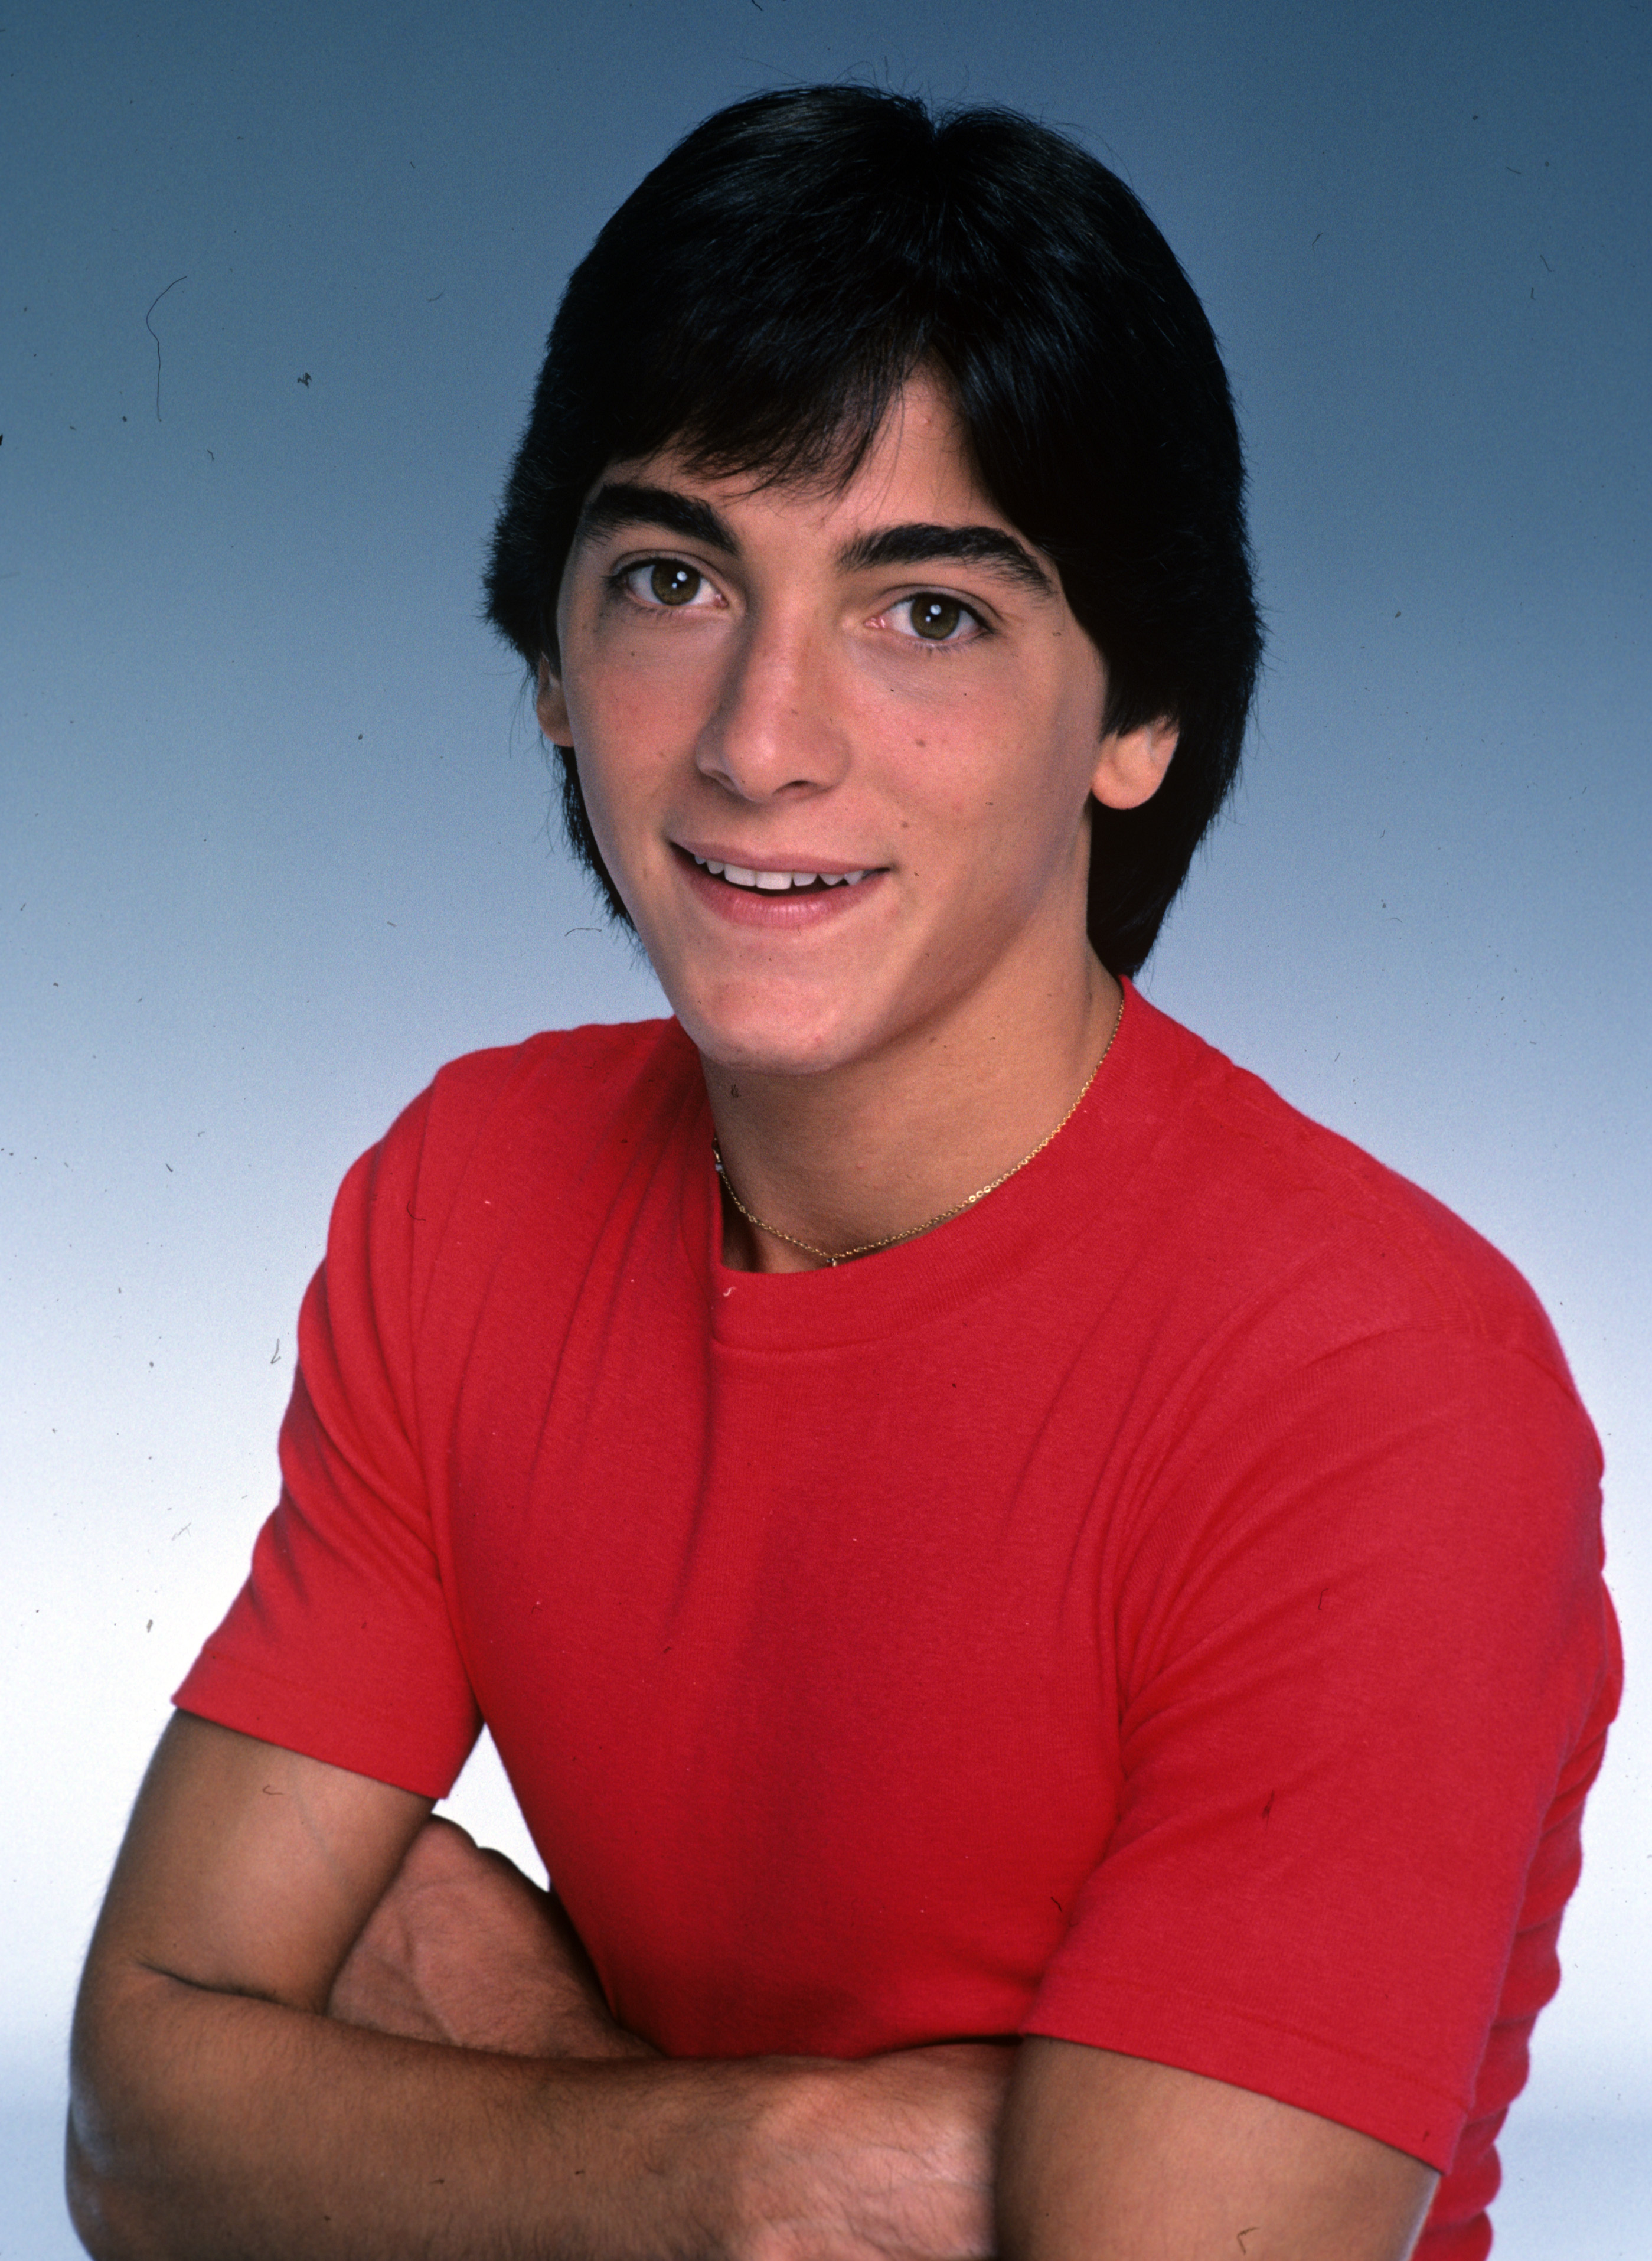 Scott Baio on "Happy Days" in 1982 | Source: Getty Images